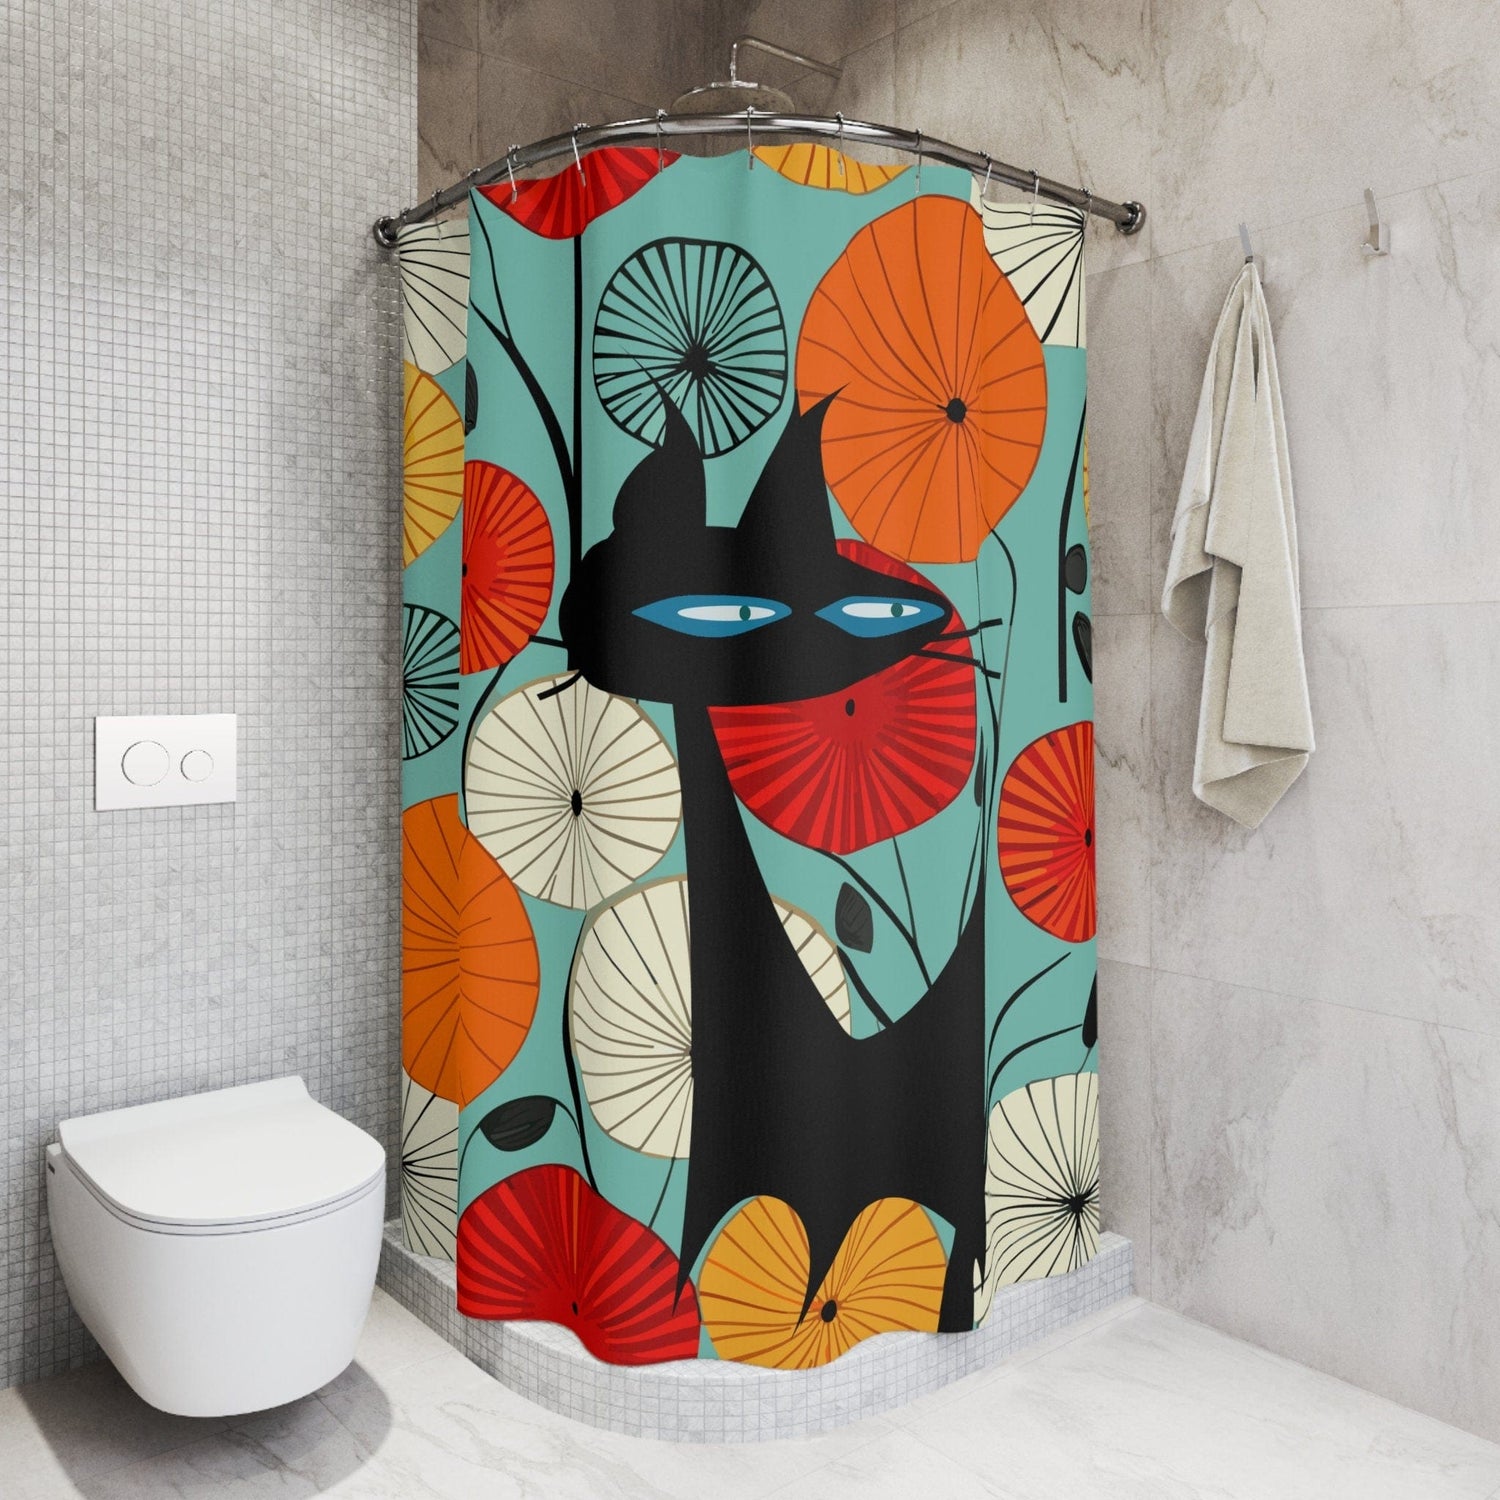 Kate McEnroe New York Atomic Cat 1950s Abstract Lotus Shower Curtain, Vintage Style Mod Geometric Design in Teal, Orange, Red and Yellow - KM13709723 Shower Curtains